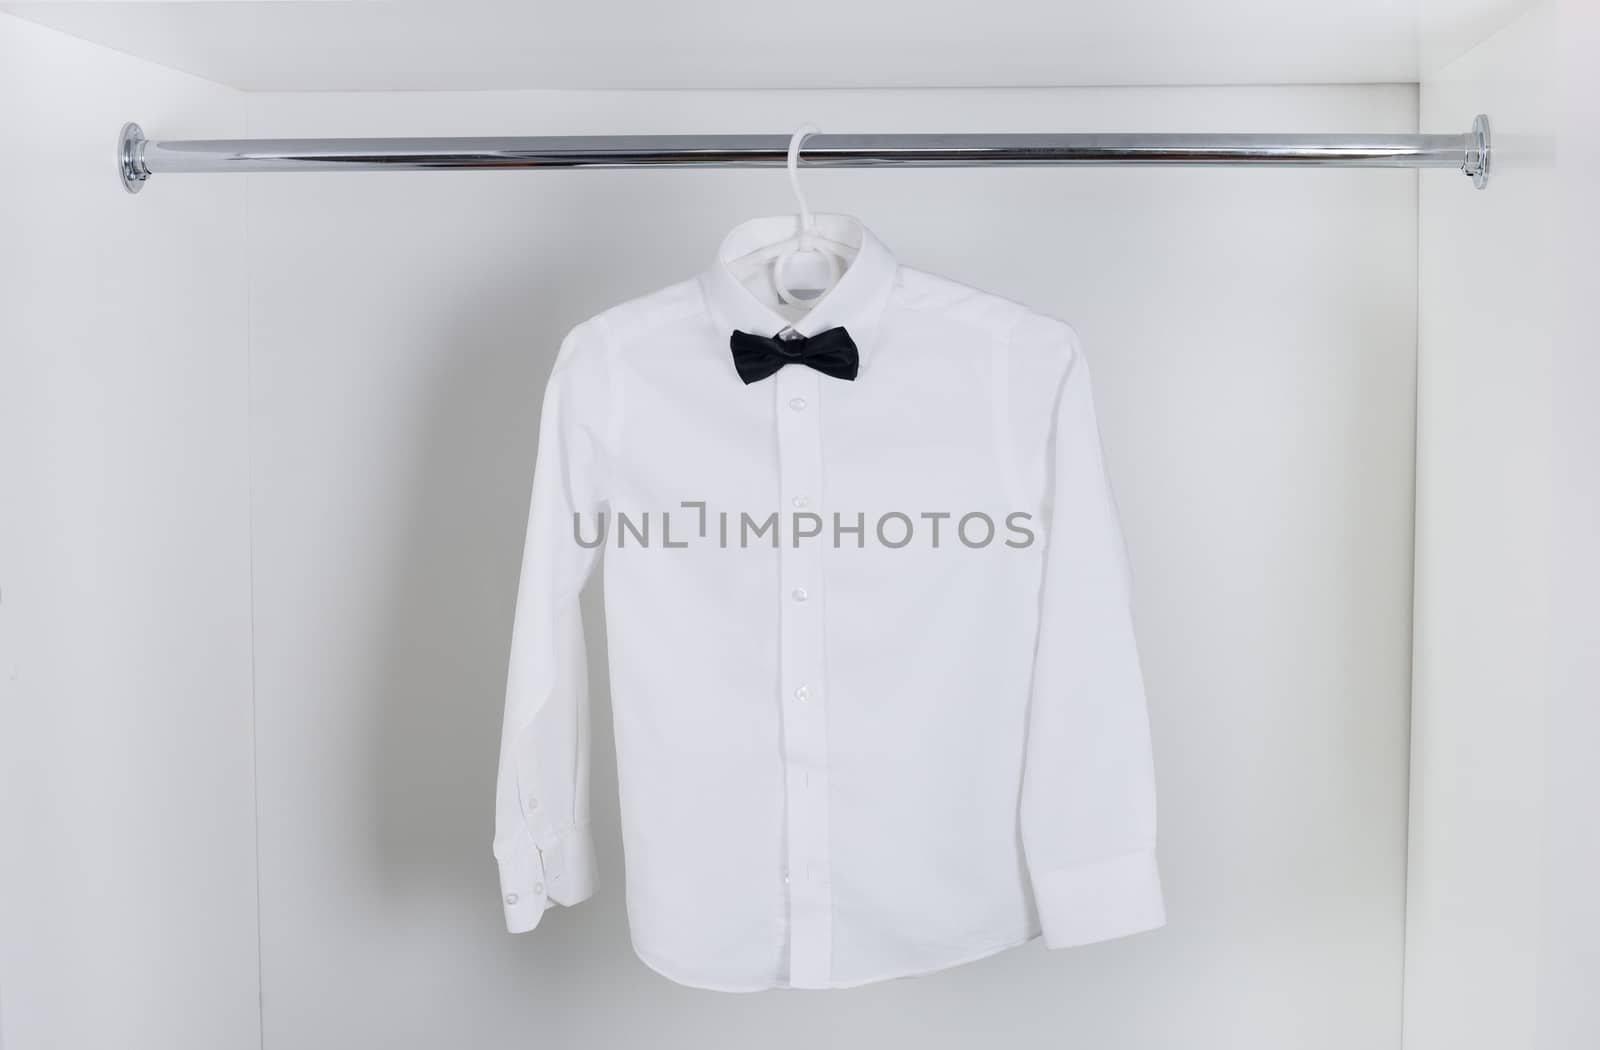 white  men's shirt with black bow tie hanging on hangers in the closet white